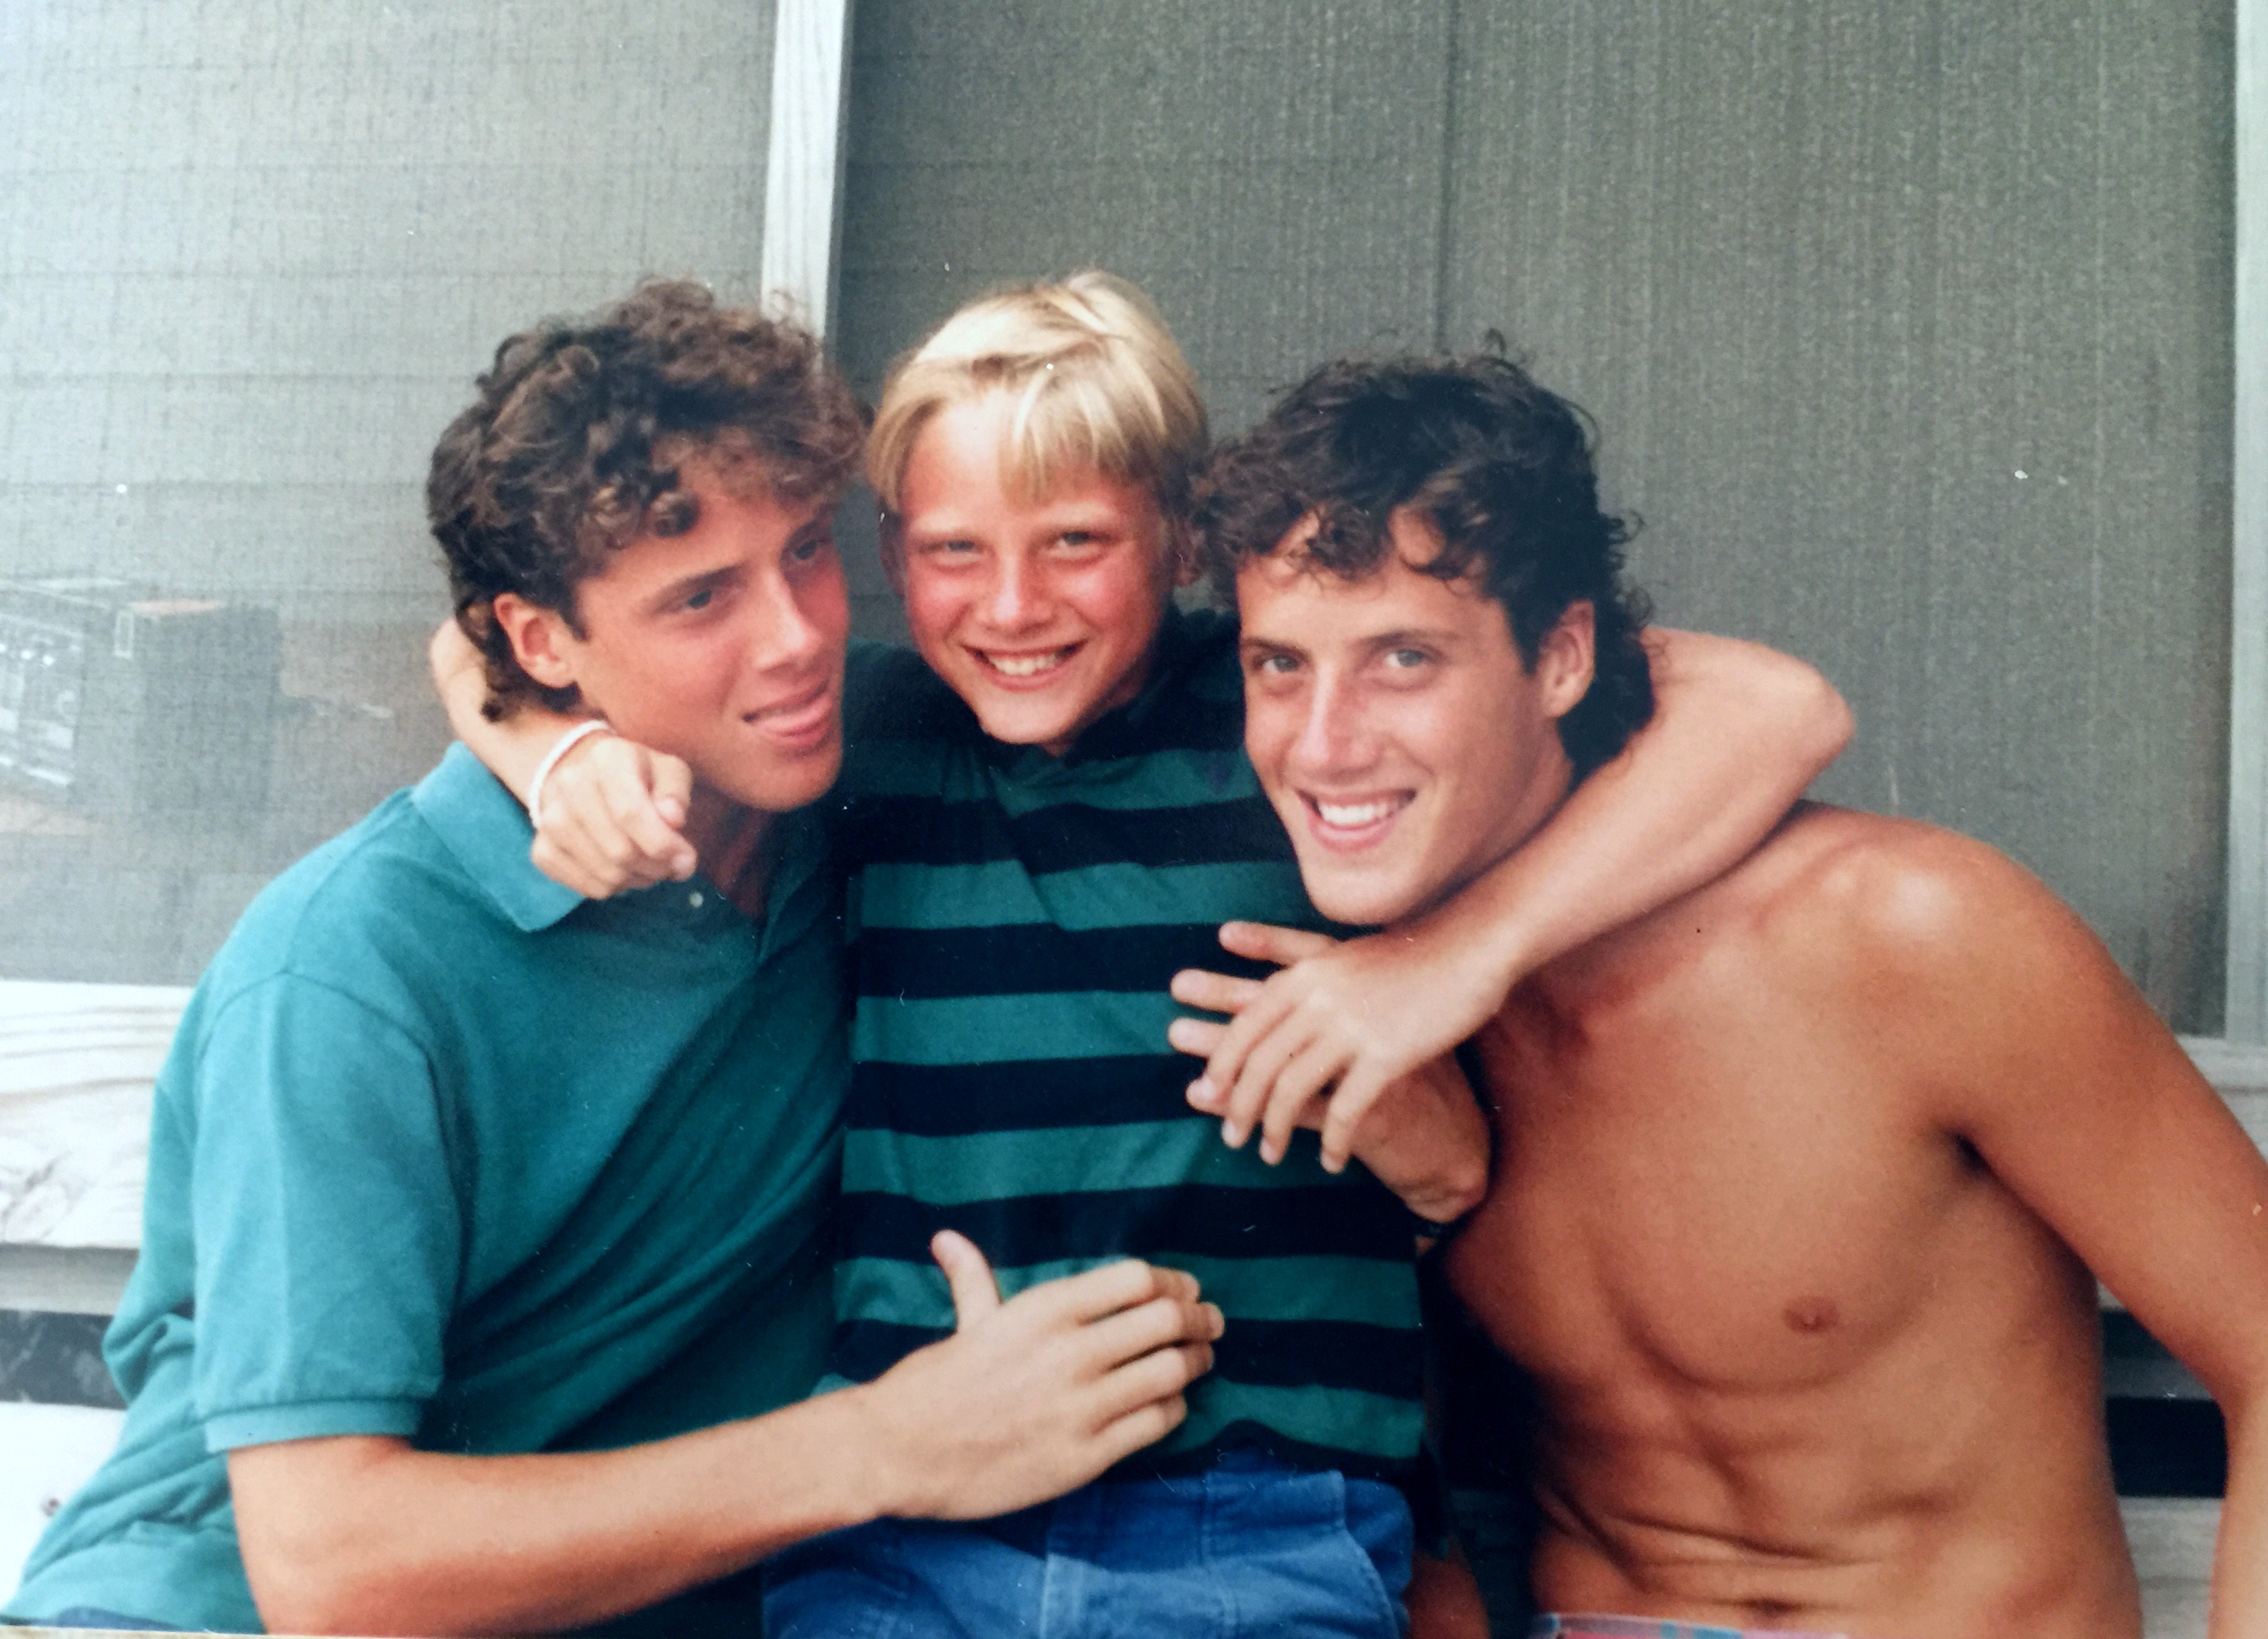 Chad, Matt and Will at Holden Beach in 1987